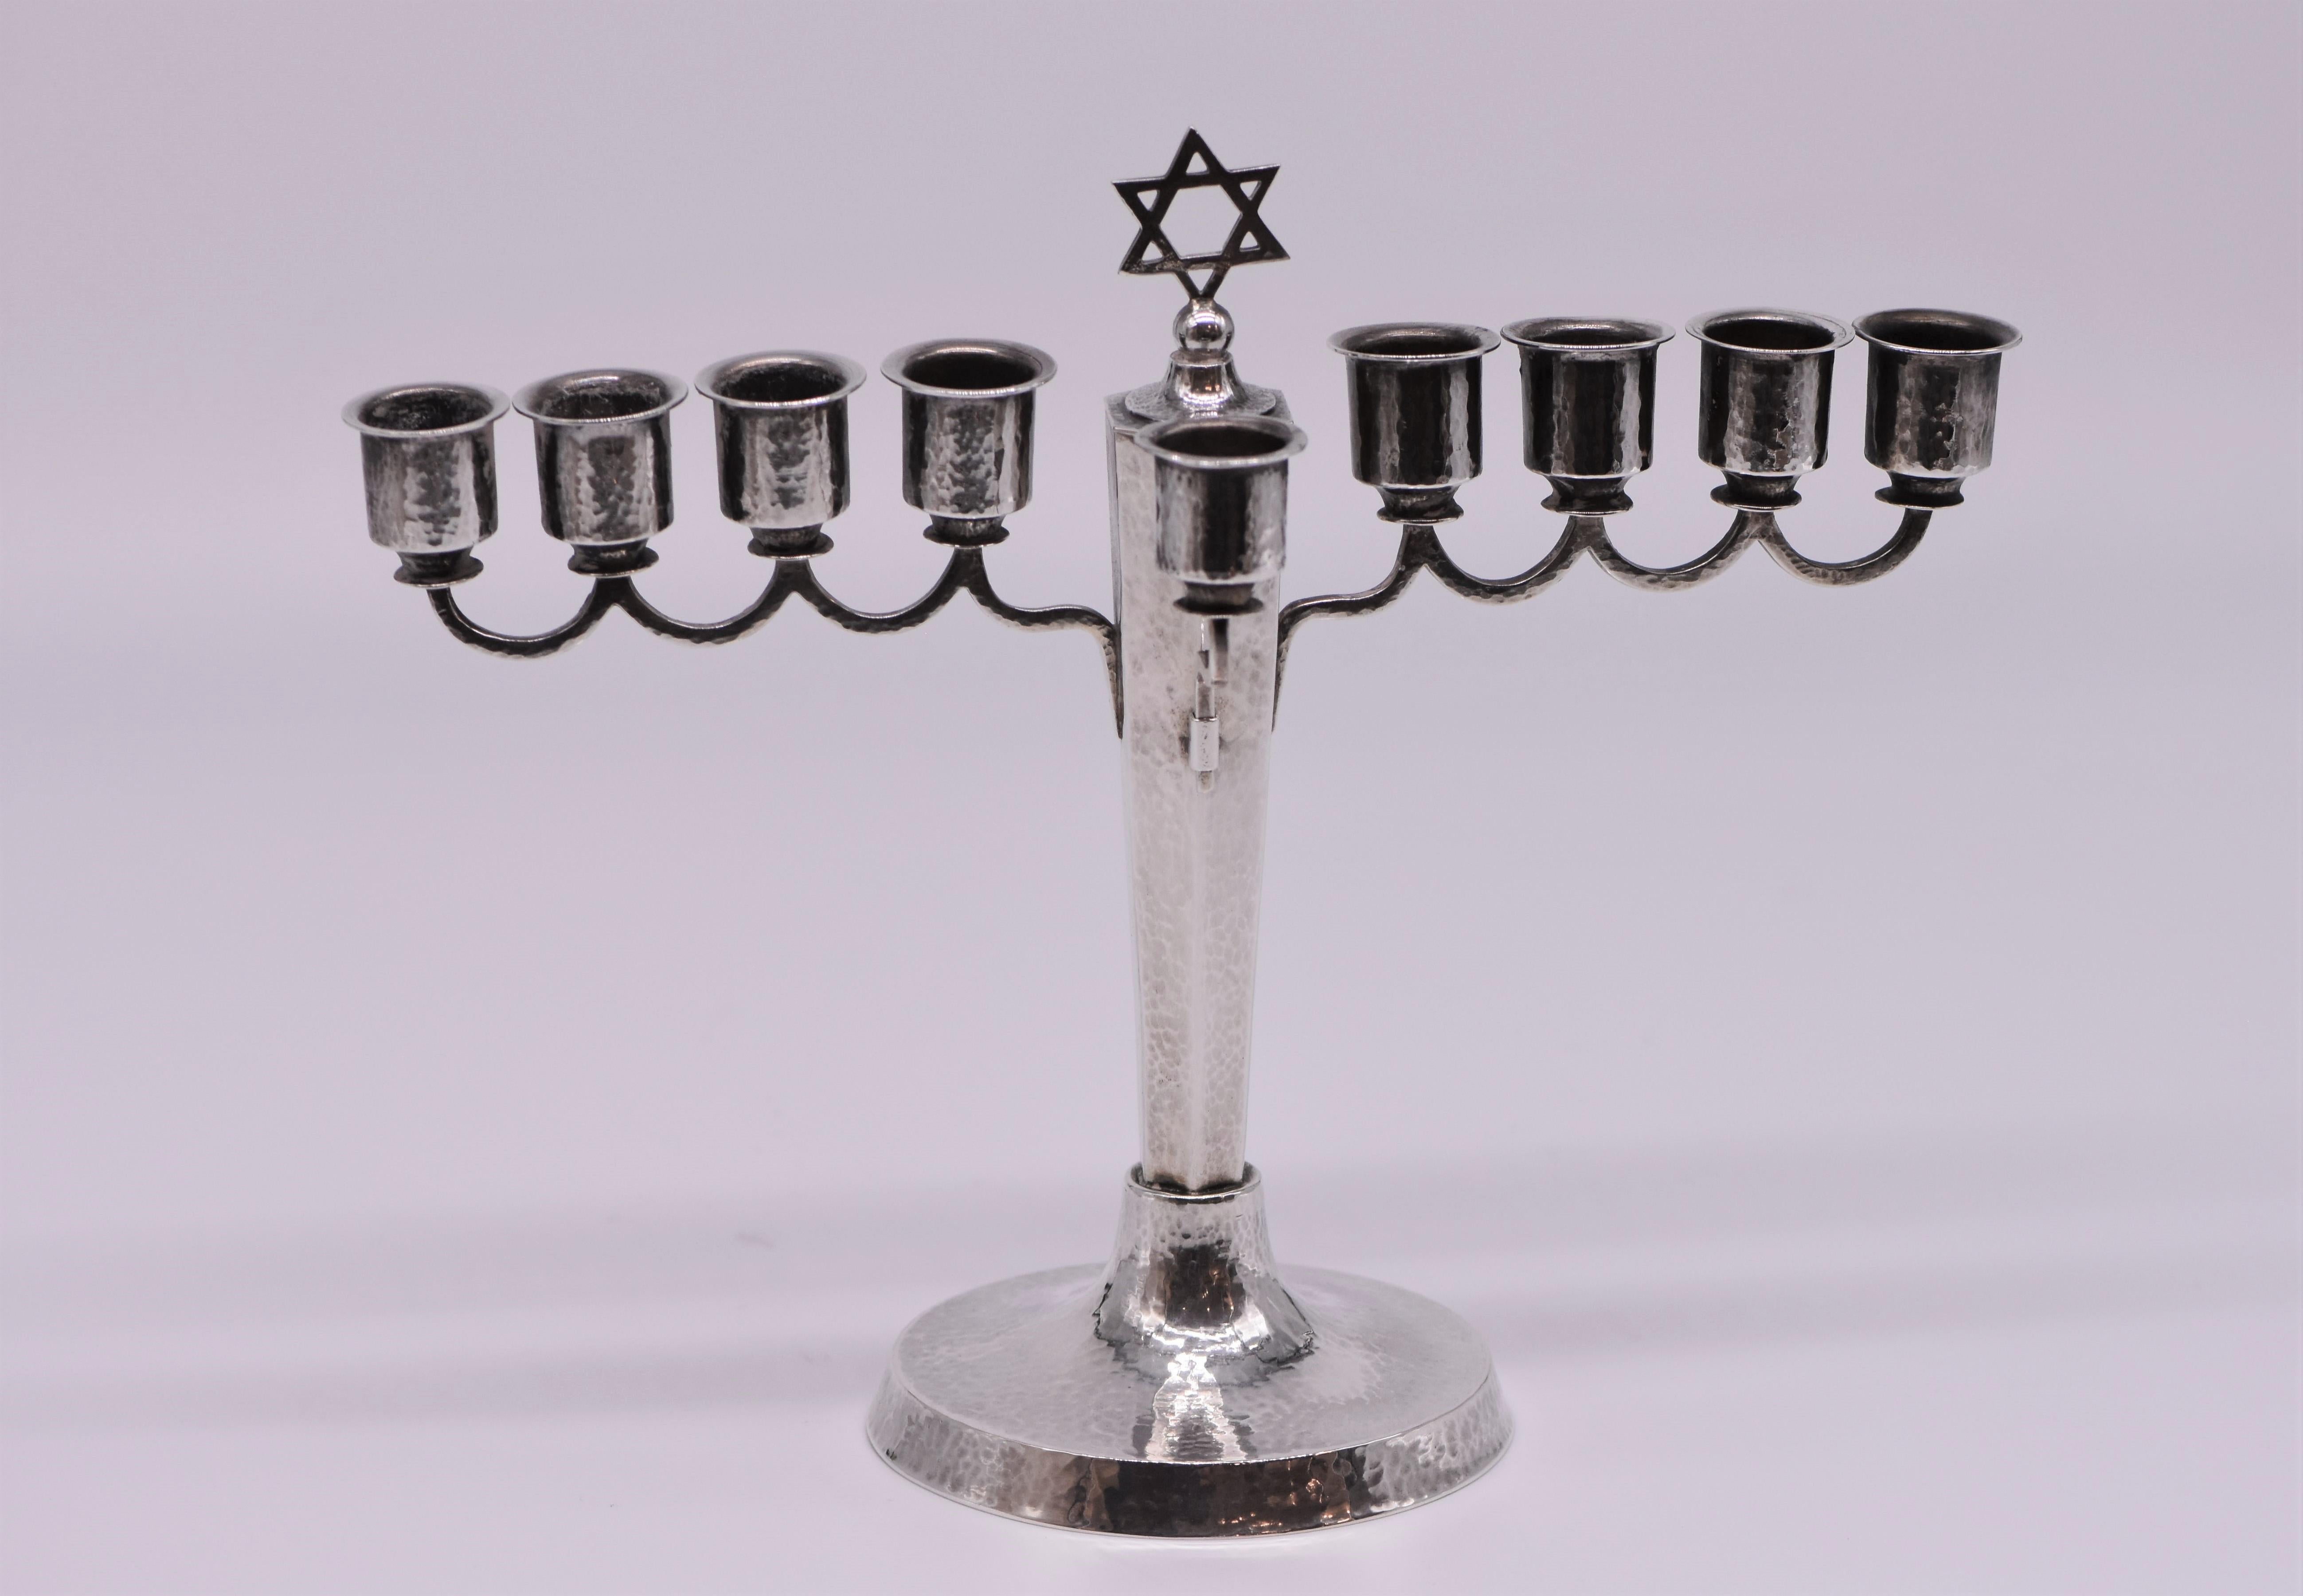 Hand-hammered silver Hanukkah lamp menorah, Germany, circa 1920.
Set on a circular hammered base, the eighth candleholders are set on eight arms.
Topped with a Star of David. Detachable original servant light.
Marked on the base with German